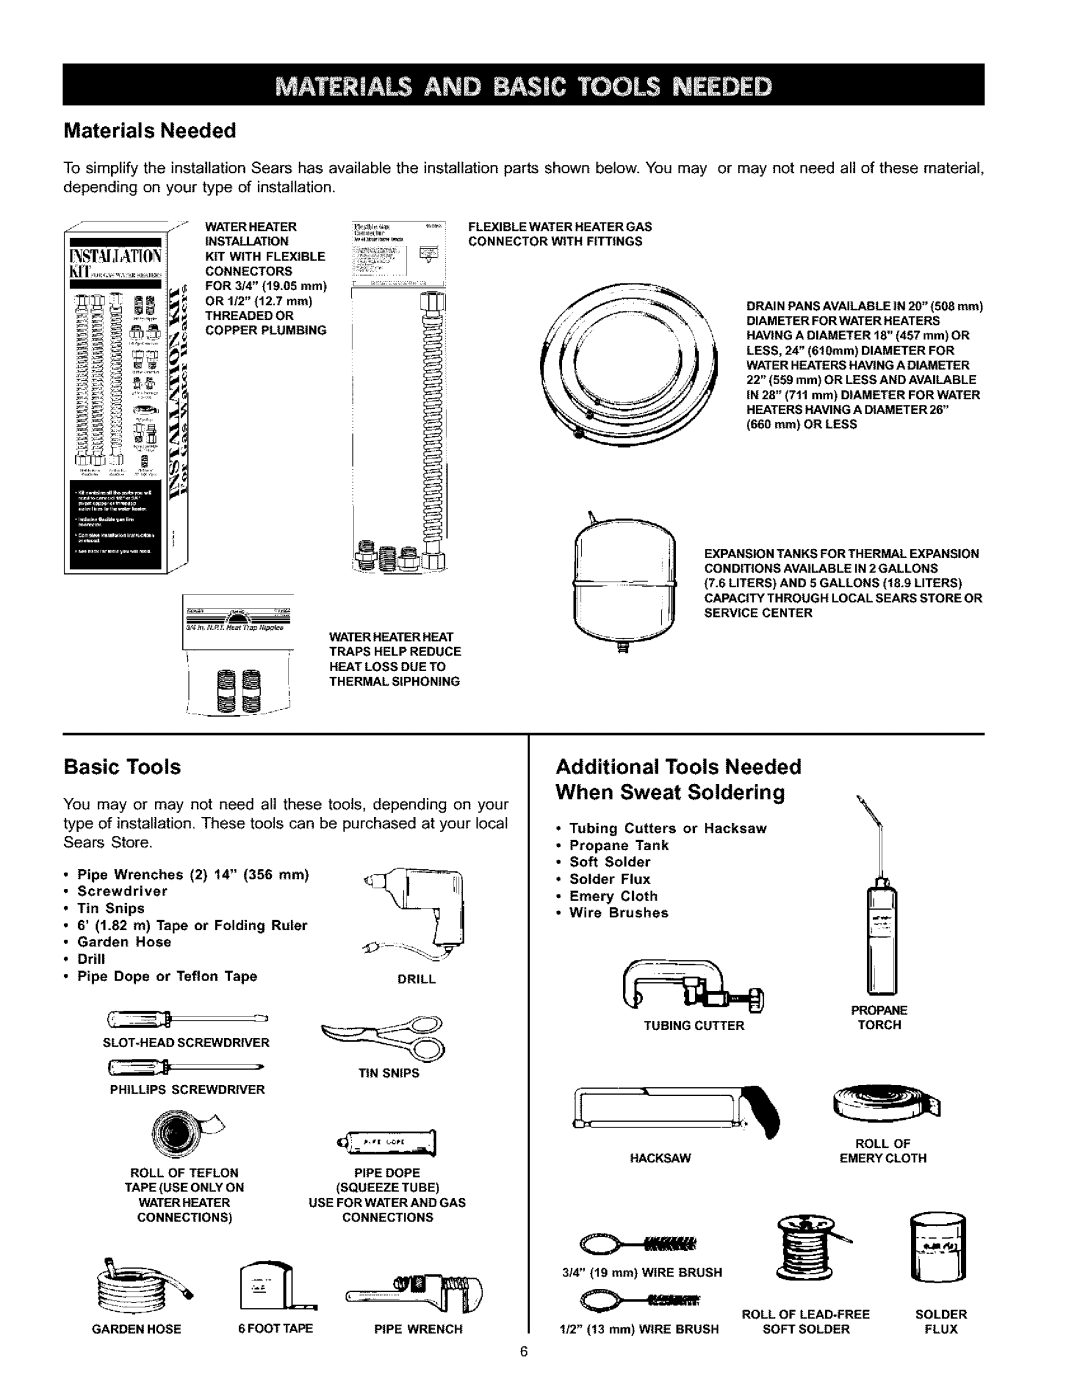 Kenmore 153.333545 Connectorskitwithflexible, Materials Needed, Basic Tools, Additional Tools Needed When Sweat Soldering 